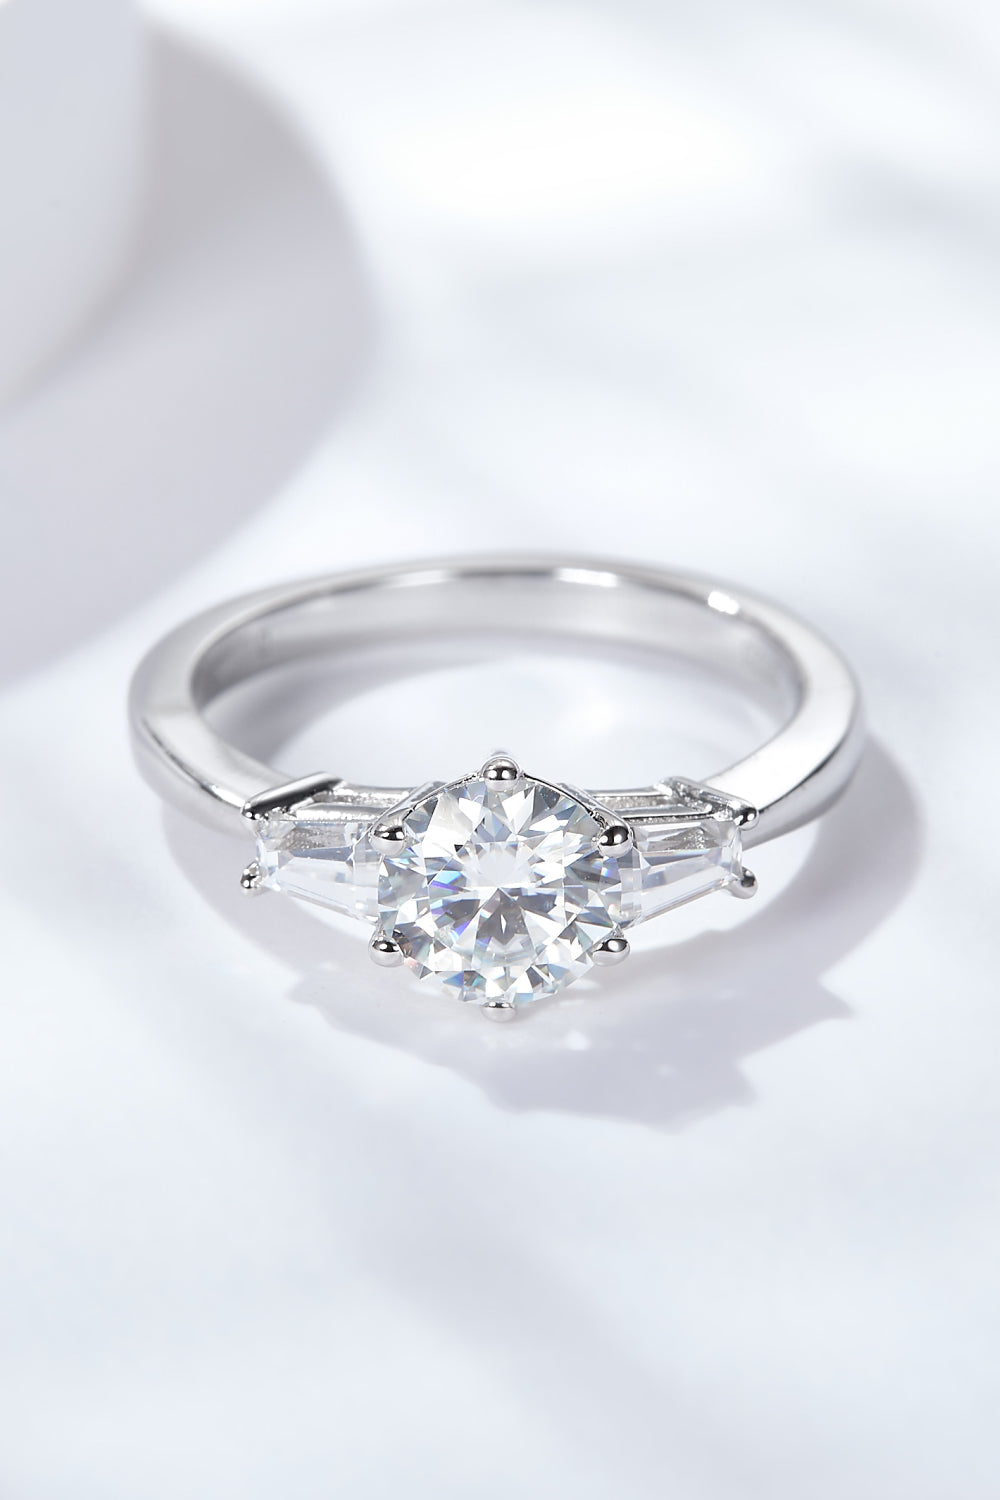 Loyal Love 1 Carat Moissanite Platinum-Plated Ring-Rings-Inspired by Justeen-Women's Clothing Boutique in Chicago, Illinois